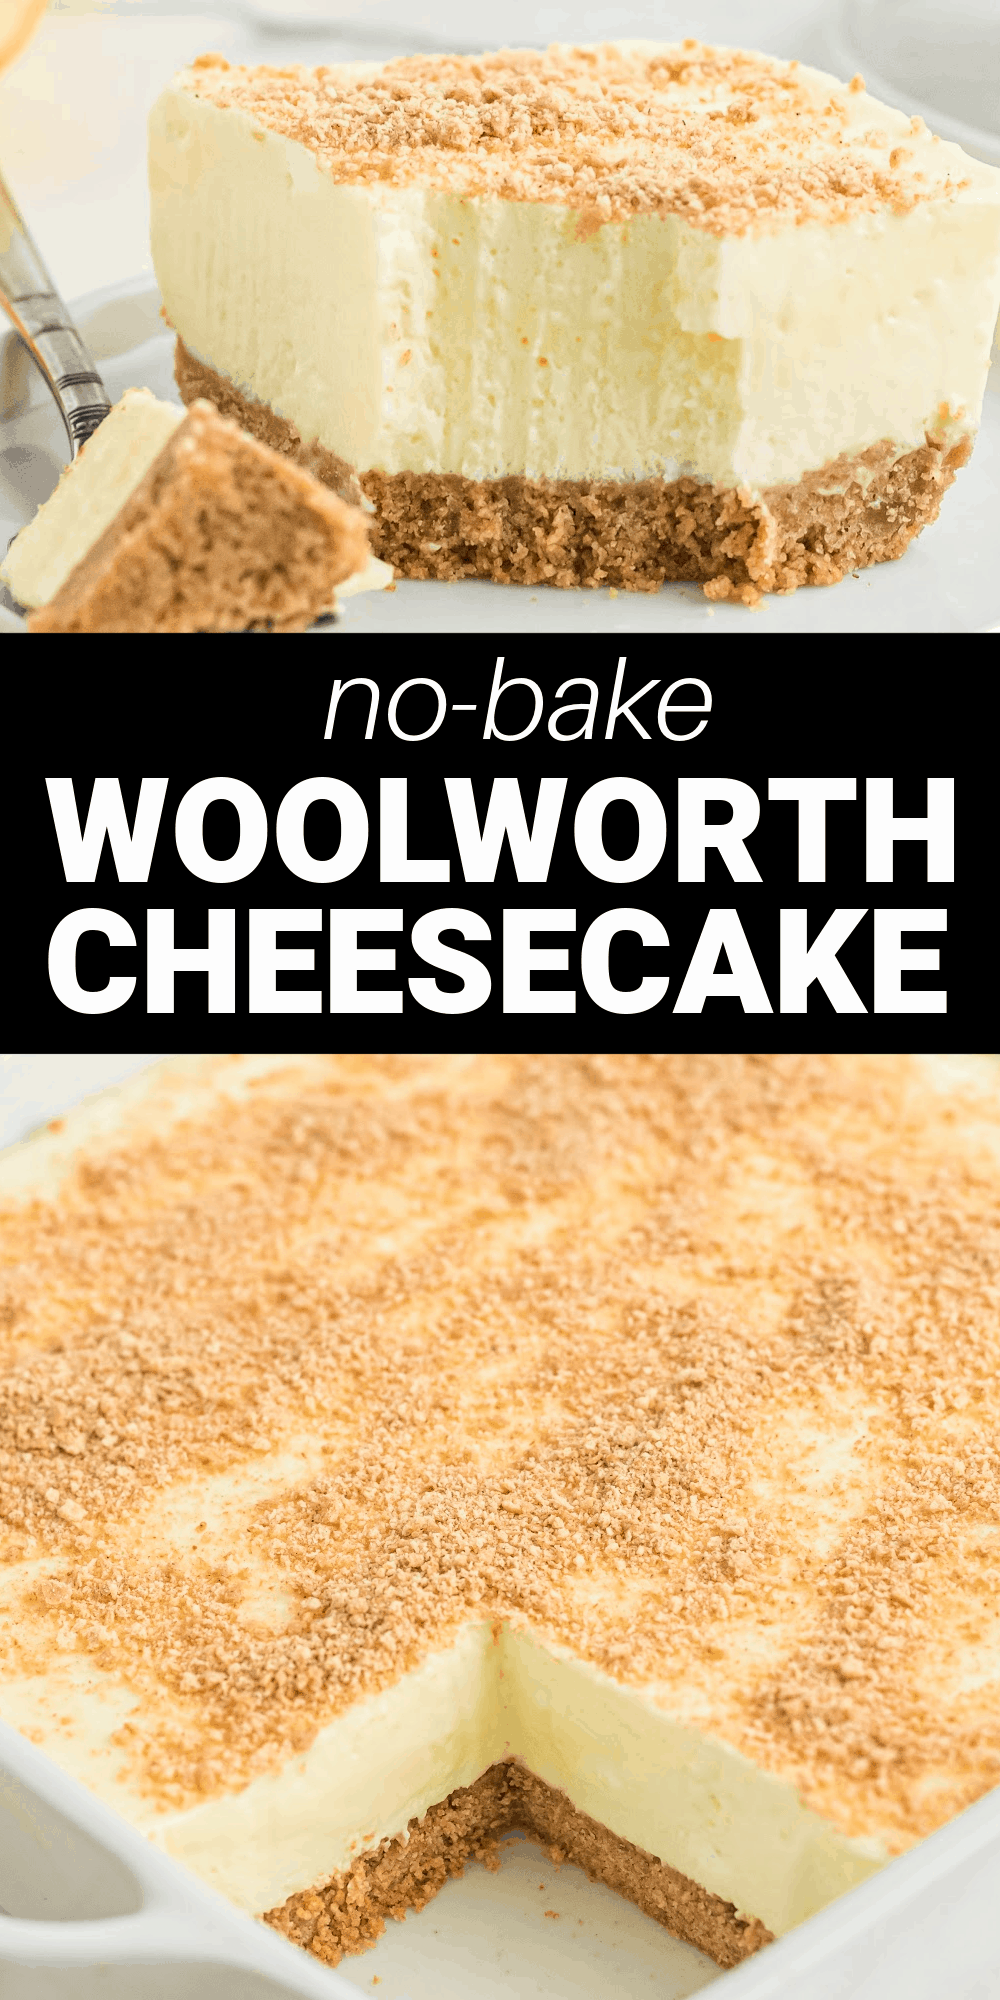 This classic Woolworth Cheesecake is a light and fluffy cheesecake with a hint of lemon flavor. Made with Jell-O, whipped cream, cream cheese, and a graham cracker crust, it has an amazing creamy texture and taste.